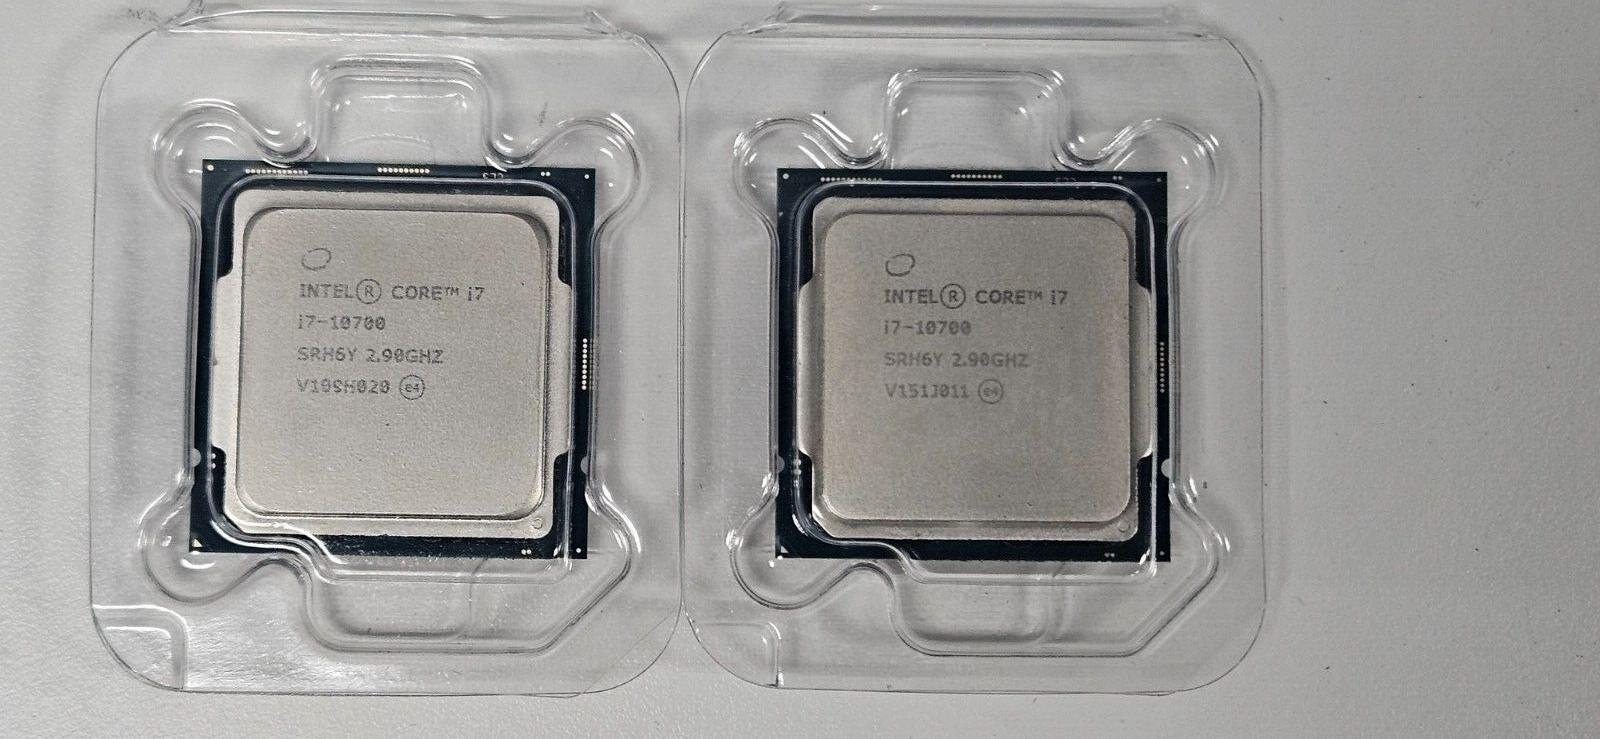 Lot of 2 Intel Core i7-10700 4.70 GHz Comet Lake SRH6Y Processors- For Charity